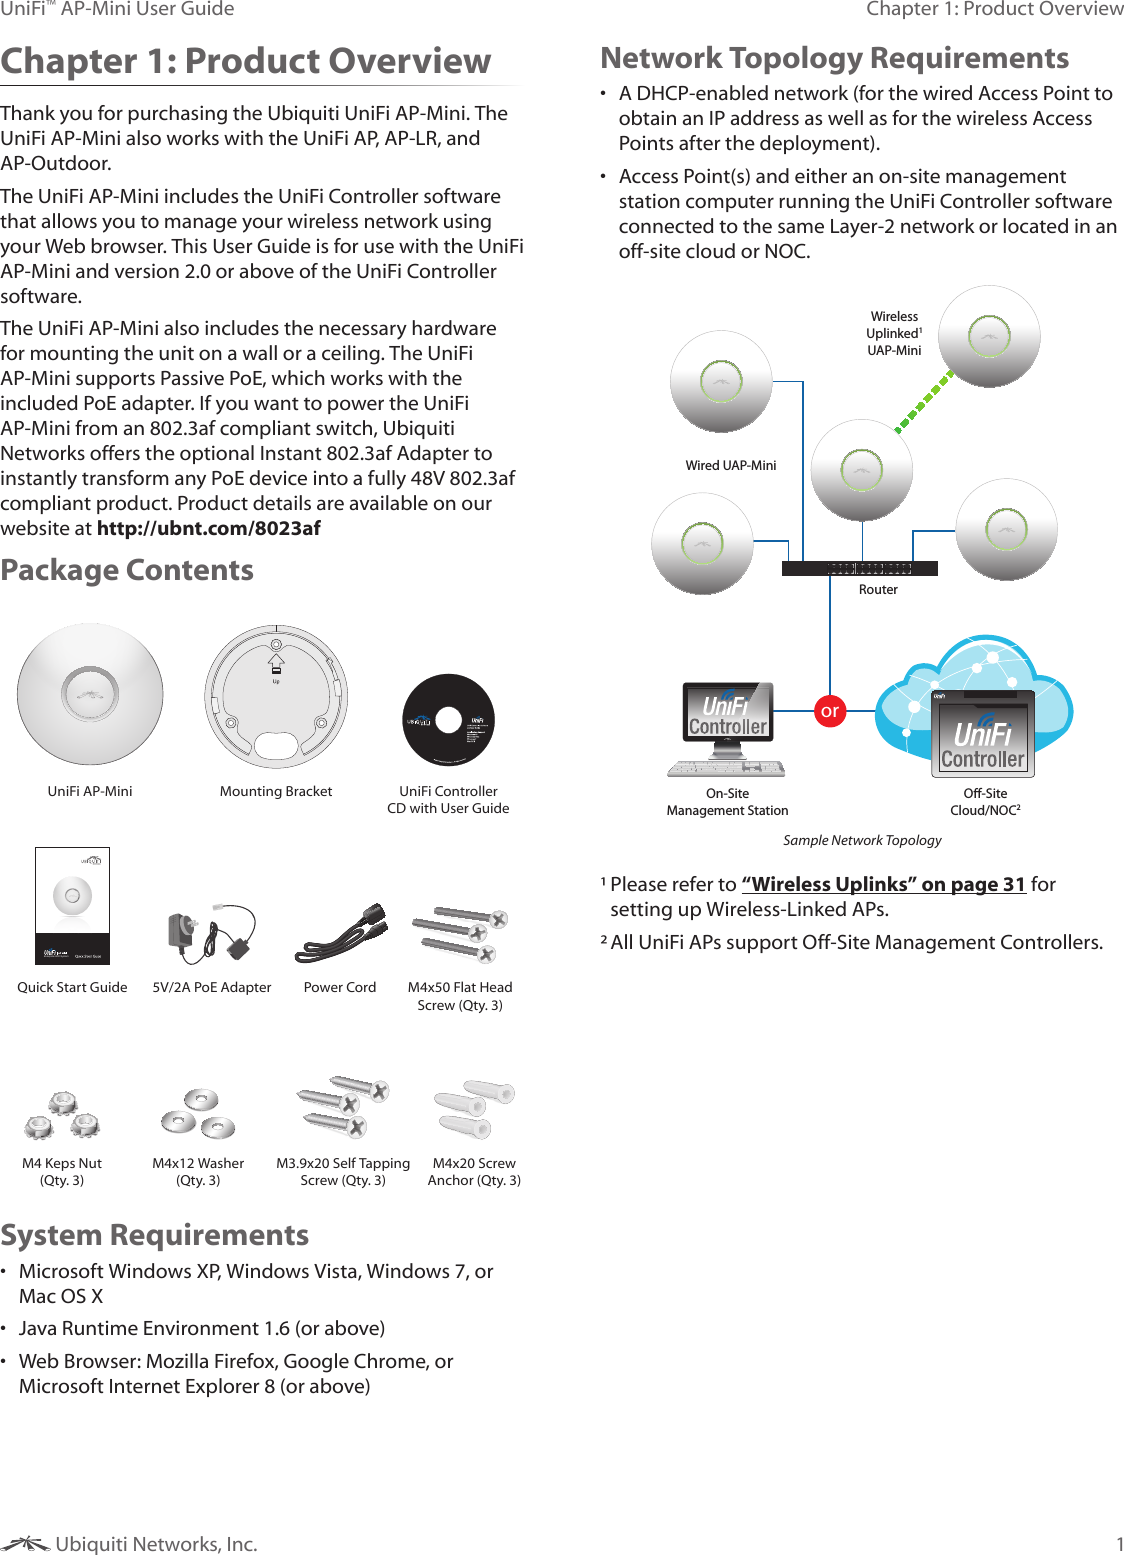 1Chapter 1: Product OverviewUniFi™ AP-Mini User Guide Ubiquiti Networks, Inc.Chapter 1: Product OverviewThank you for purchasing the Ubiquiti UniFi AP-Mini. The UniFi AP-Mini also works with the UniFi AP, AP-LR, and AP-Outdoor. The UniFi AP-Mini includes the UniFi Controller software that allows you to manage your wireless network using your Web browser. This User Guide is for use with the UniFi AP-Mini and version 2.0 or above of the UniFi Controller software. The UniFi AP-Mini also includes the necessary hardware for mounting the unit on a wall or a ceiling. The UniFi AP-Mini supports Passive PoE, which works with the included PoE adapter. If you want to power the UniFi AP-Mini from an 802.3af compliant switch, Ubiquiti Networks offers the optional Instant 802.3af Adapter to instantly transform any PoE device into a fully 48V 802.3af compliant product. Product details are available on our website at http://ubnt.com/8023afPackage ContentsUniFi AP-Mini Mounting Bracket UniFi Controller CD with User GuideEnterprise WiFi SystemQuick Start Guide 5V/2A PoE Adapter Power Cord M4x50 Flat Head Screw (Qty. 3)M4 Keps Nut (Qty. 3)M4x12 Washer (Qty. 3)M3.9x20 Self Tapping Screw (Qty. 3)M4x20 Screw Anchor (Qty. 3)System Requirements• Microsoft Windows XP, Windows Vista, Windows 7, or Mac OS X• Java Runtime Environment 1.6 (or above)• Web Browser: Mozilla Firefox, Google Chrome, or Microsoft Internet Explorer 8 (or above)Network Topology Requirements• A DHCP-enabled network (for the wired Access Point to obtain an IP address as well as for the wireless Access Points after the deployment).• Access Point(s) and either an on-site management station computer running the UniFi Controller software connected to the same Layer-2 network or located in an off-site cloud or NOC.orRouterO-SiteCloud/NOC2On-SiteManagement StationWired UAP-MiniWirelessUplinked1UAP-MiniSample Network Topology¹ Please refer to “Wireless Uplinks” on page 31 for setting up Wireless-Linked APs.² All UniFi APs support Off-Site Management Controllers.